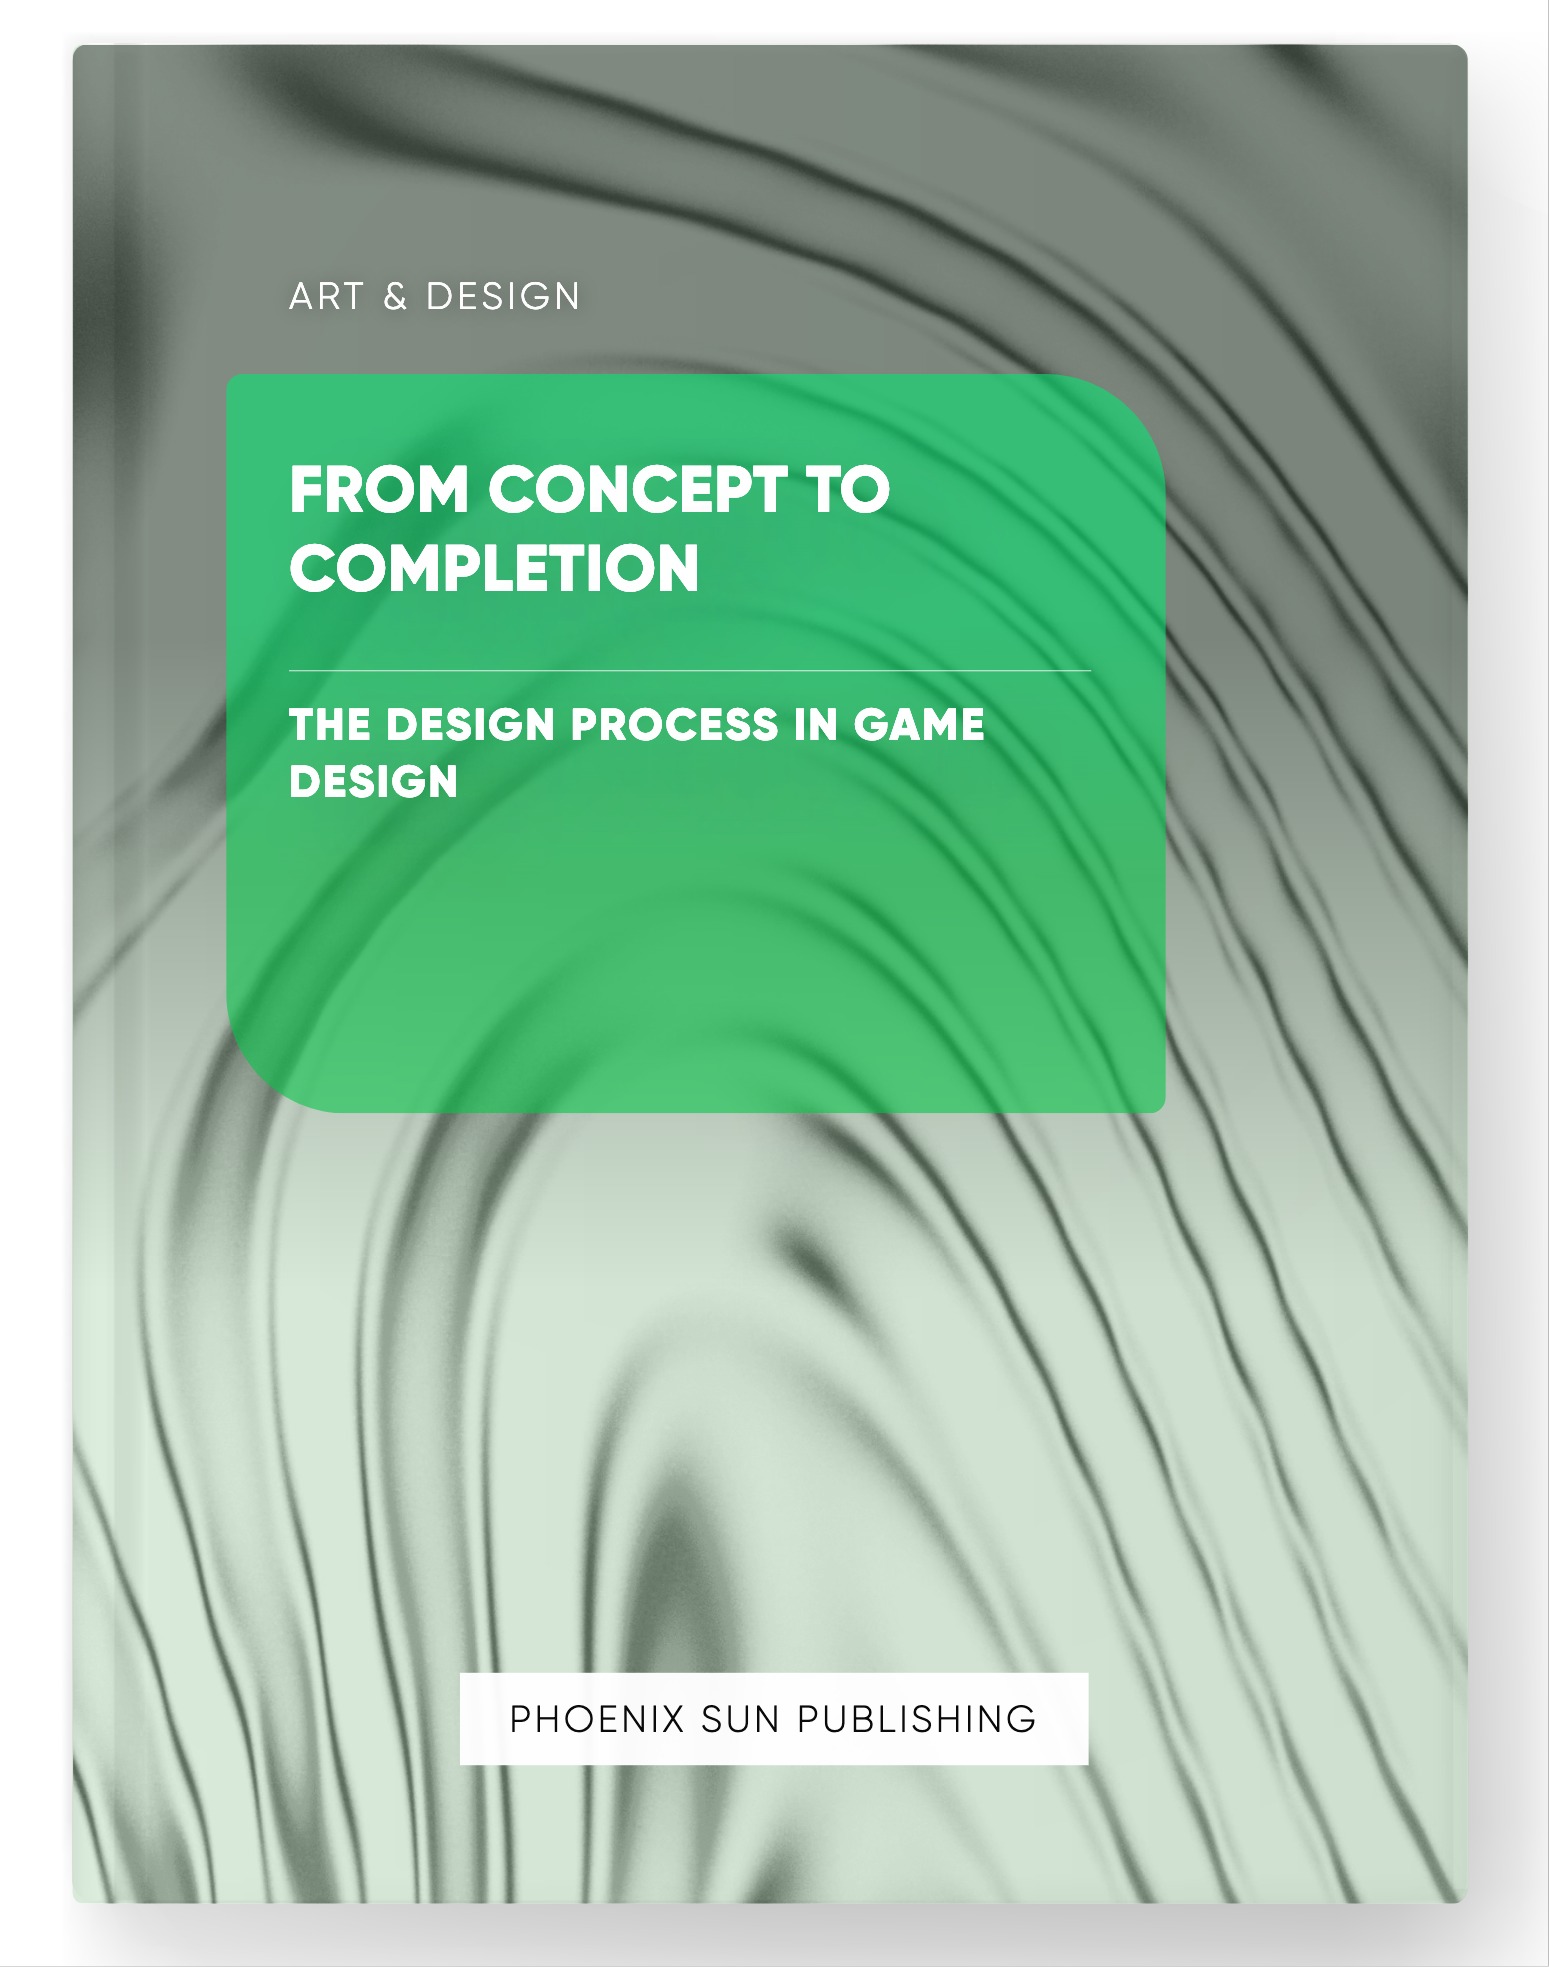 From Concept to Completion – The Design Process in Game Design